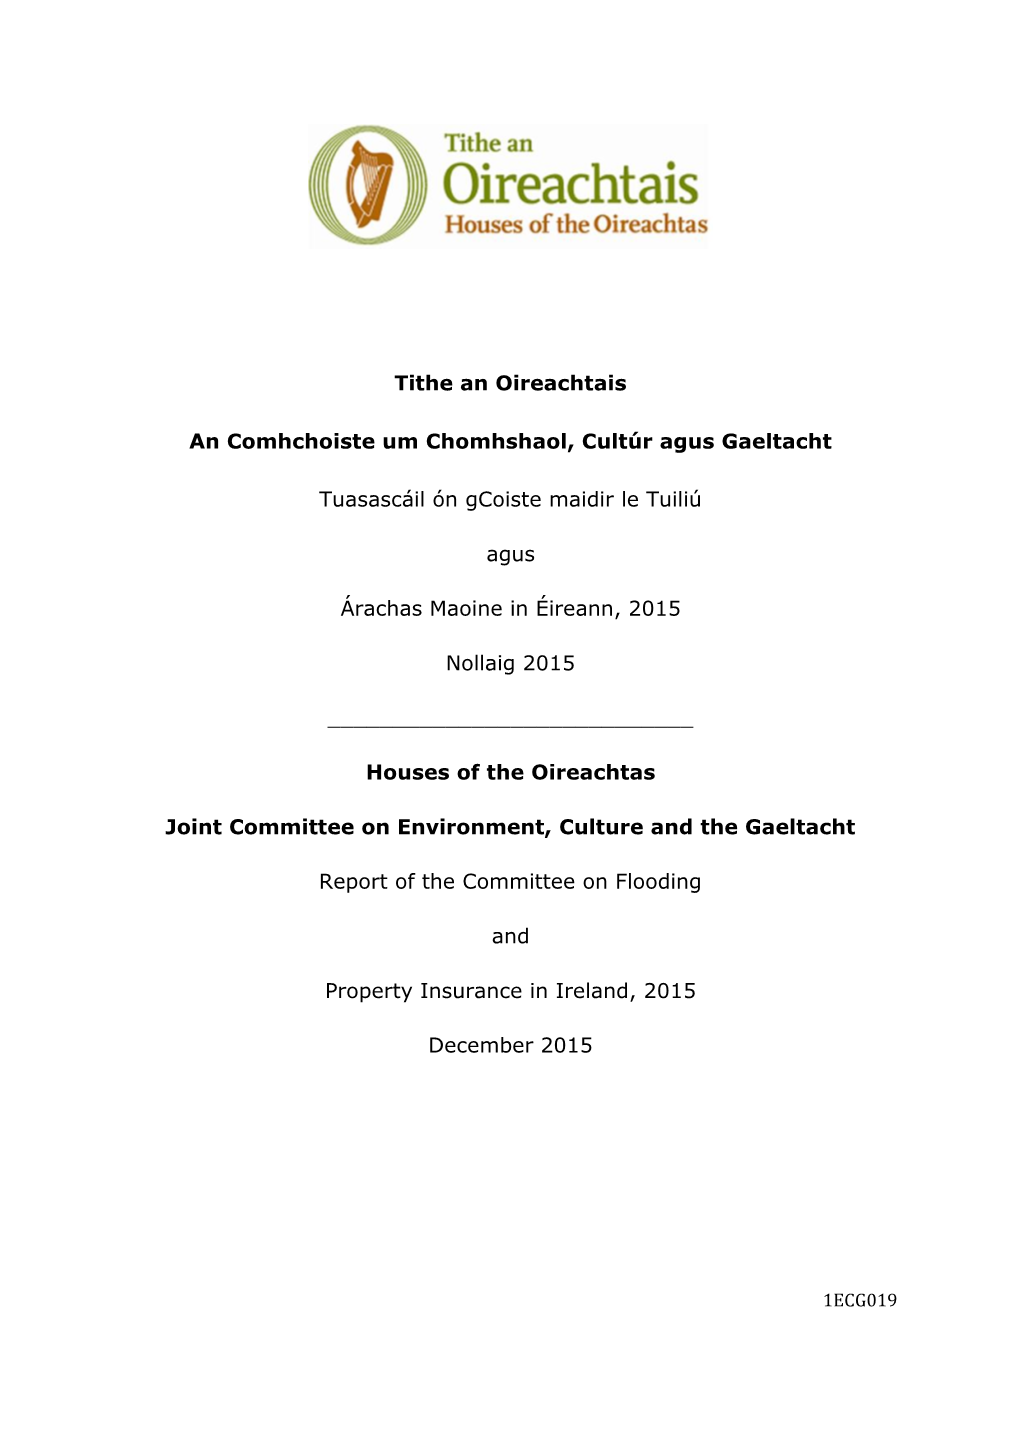 Report of the Committee on Flooding and Property Insurance in Ireland 2015